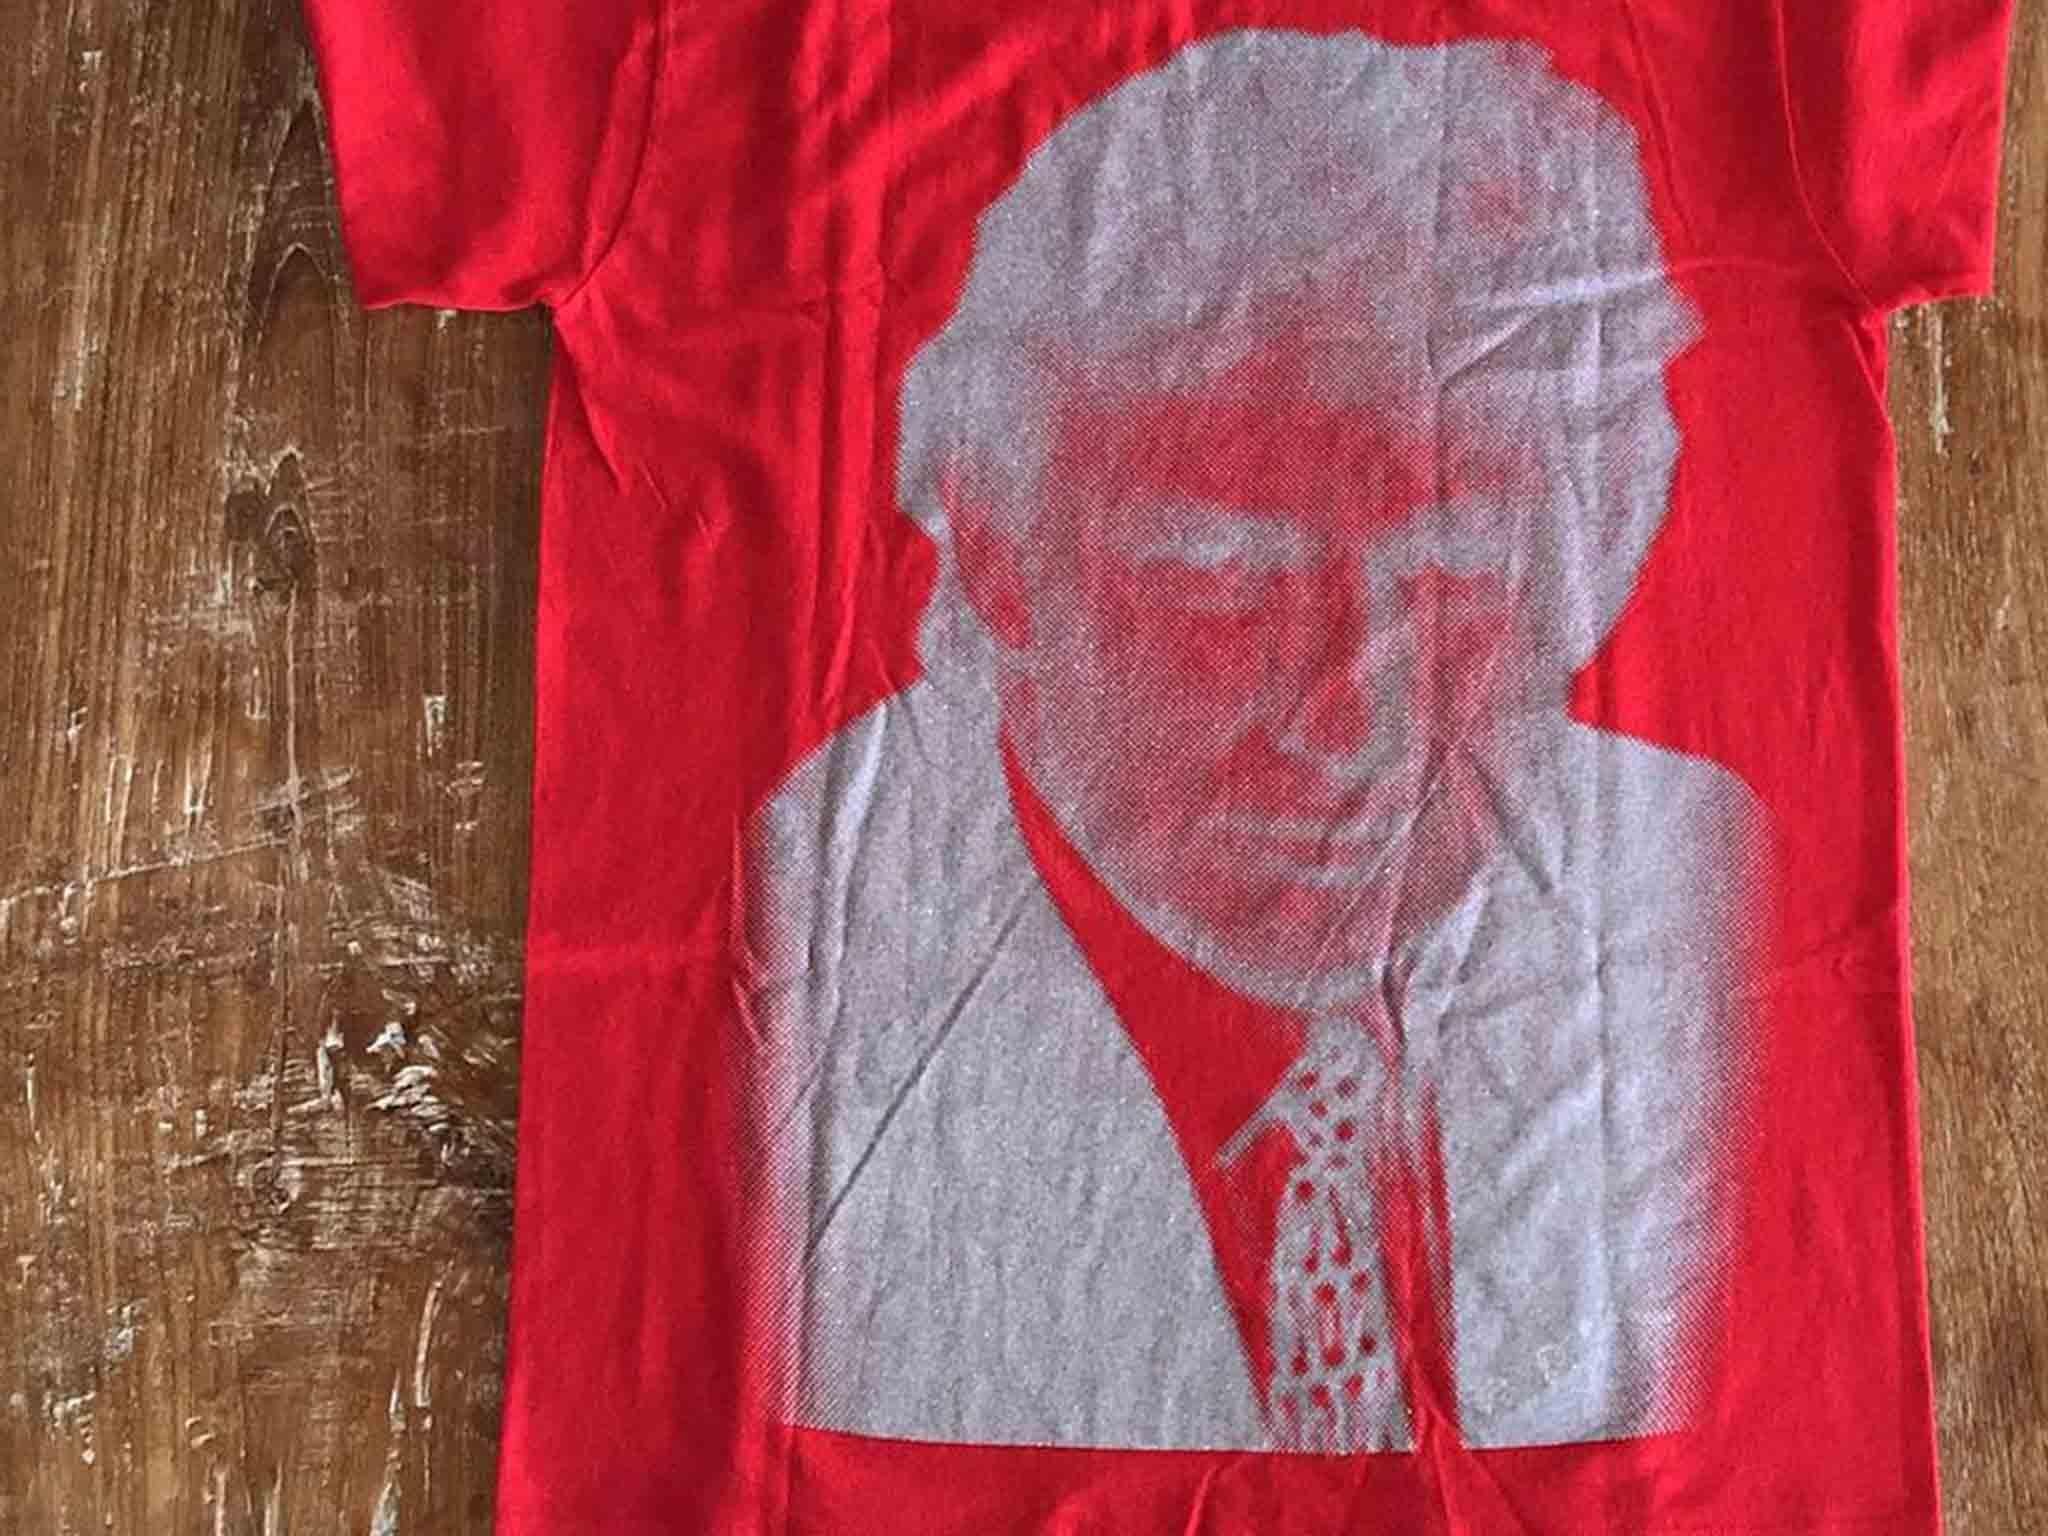 Supreme t-shirt featuring image of Donald Trump has sold for $23k